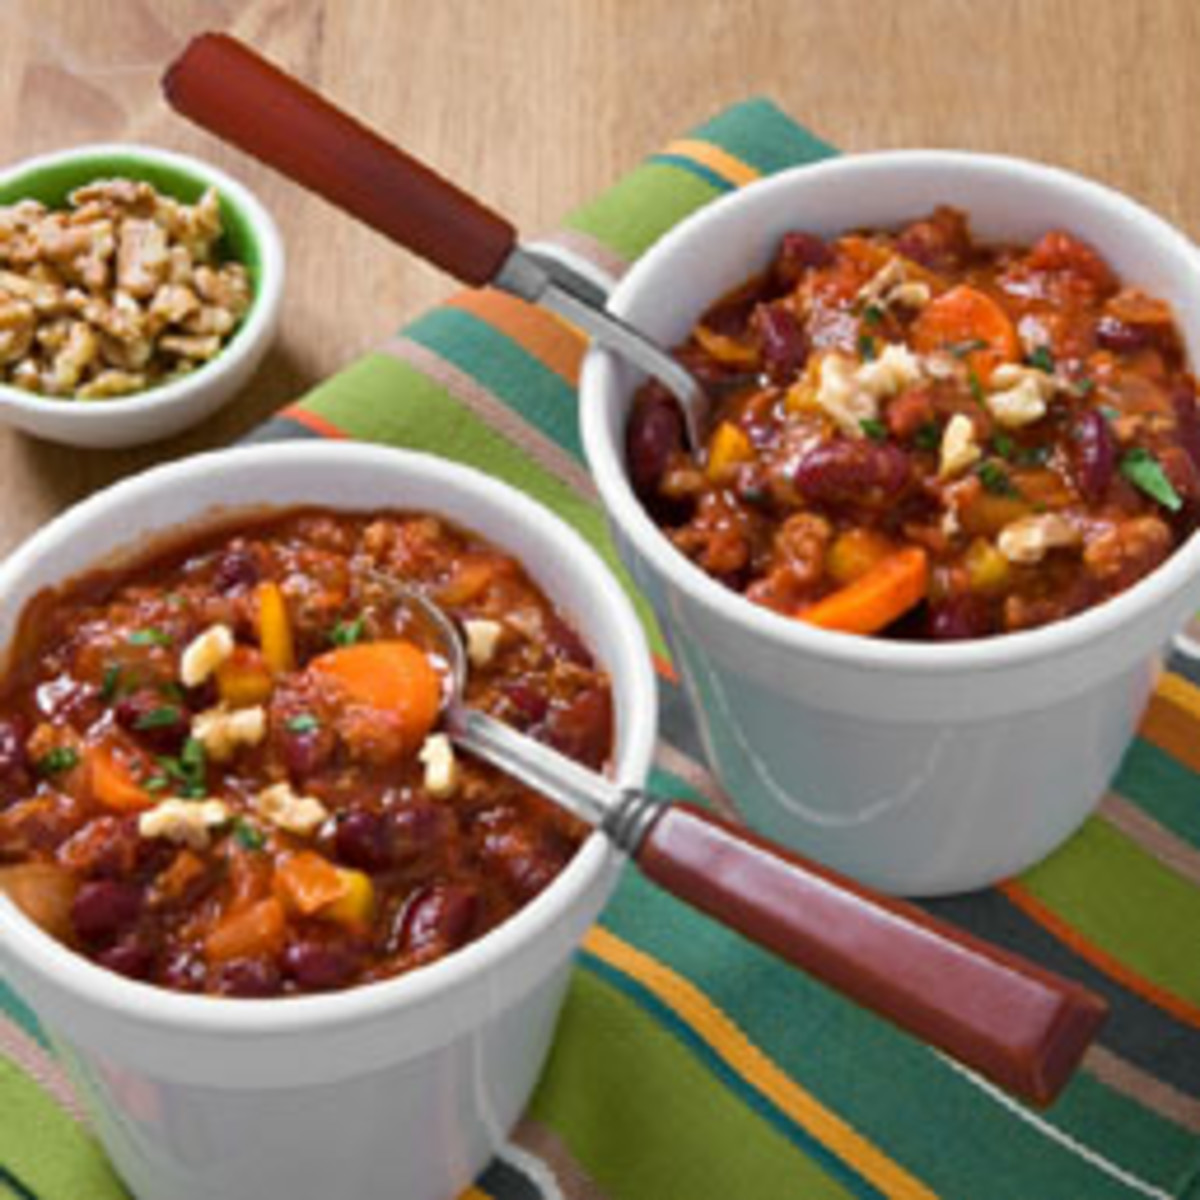 Brilliant Chili Topped with Walnuts